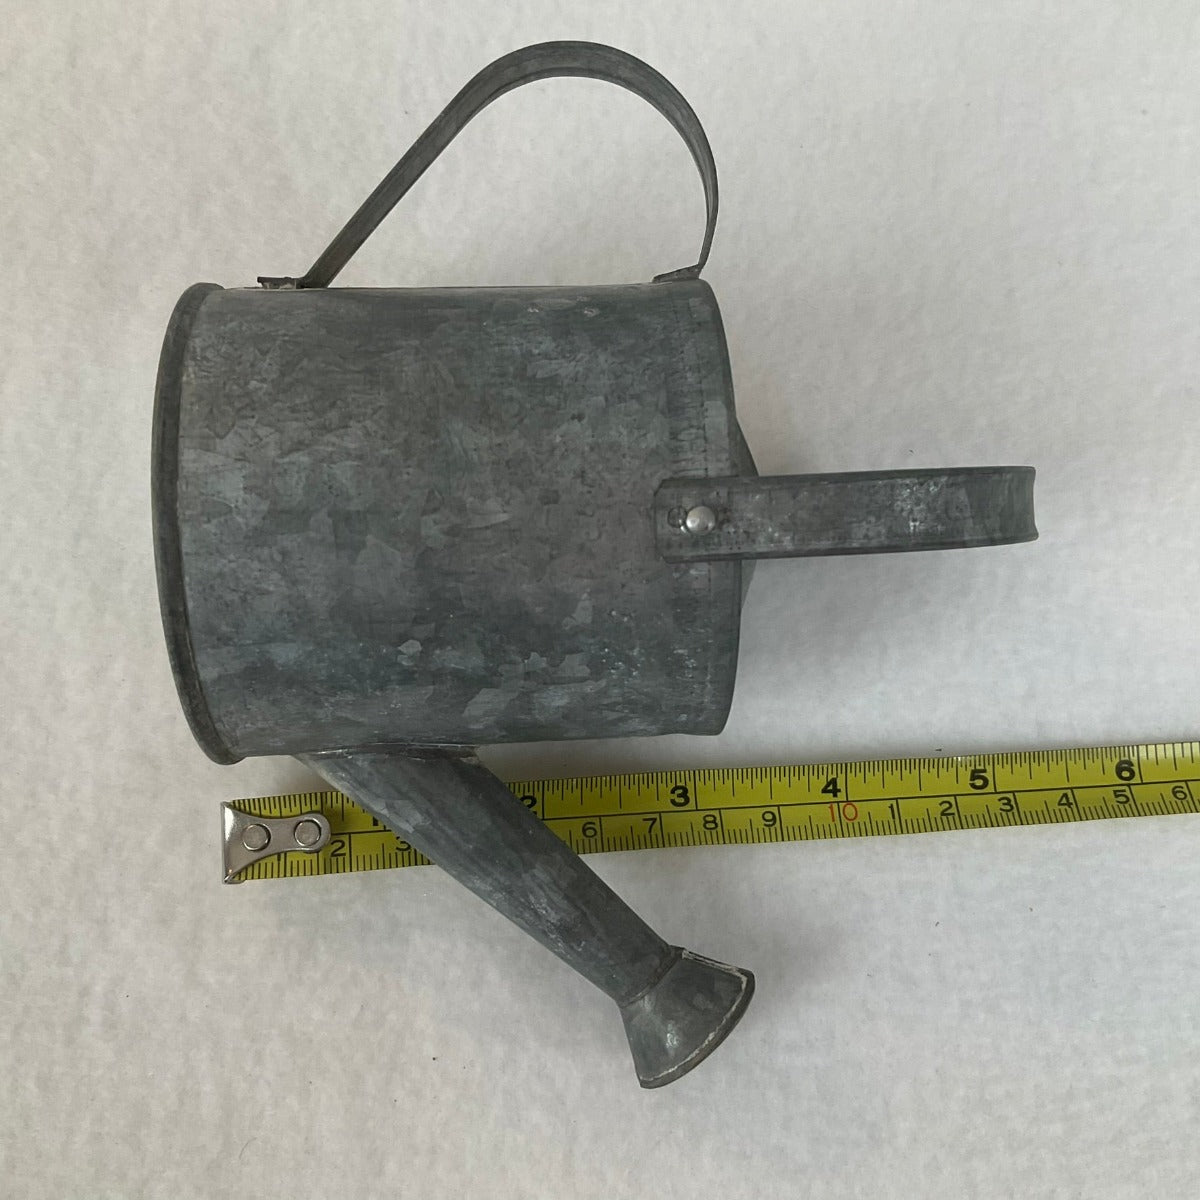 Mini Galvanized Watering Can - 5 inches High with Handle Up